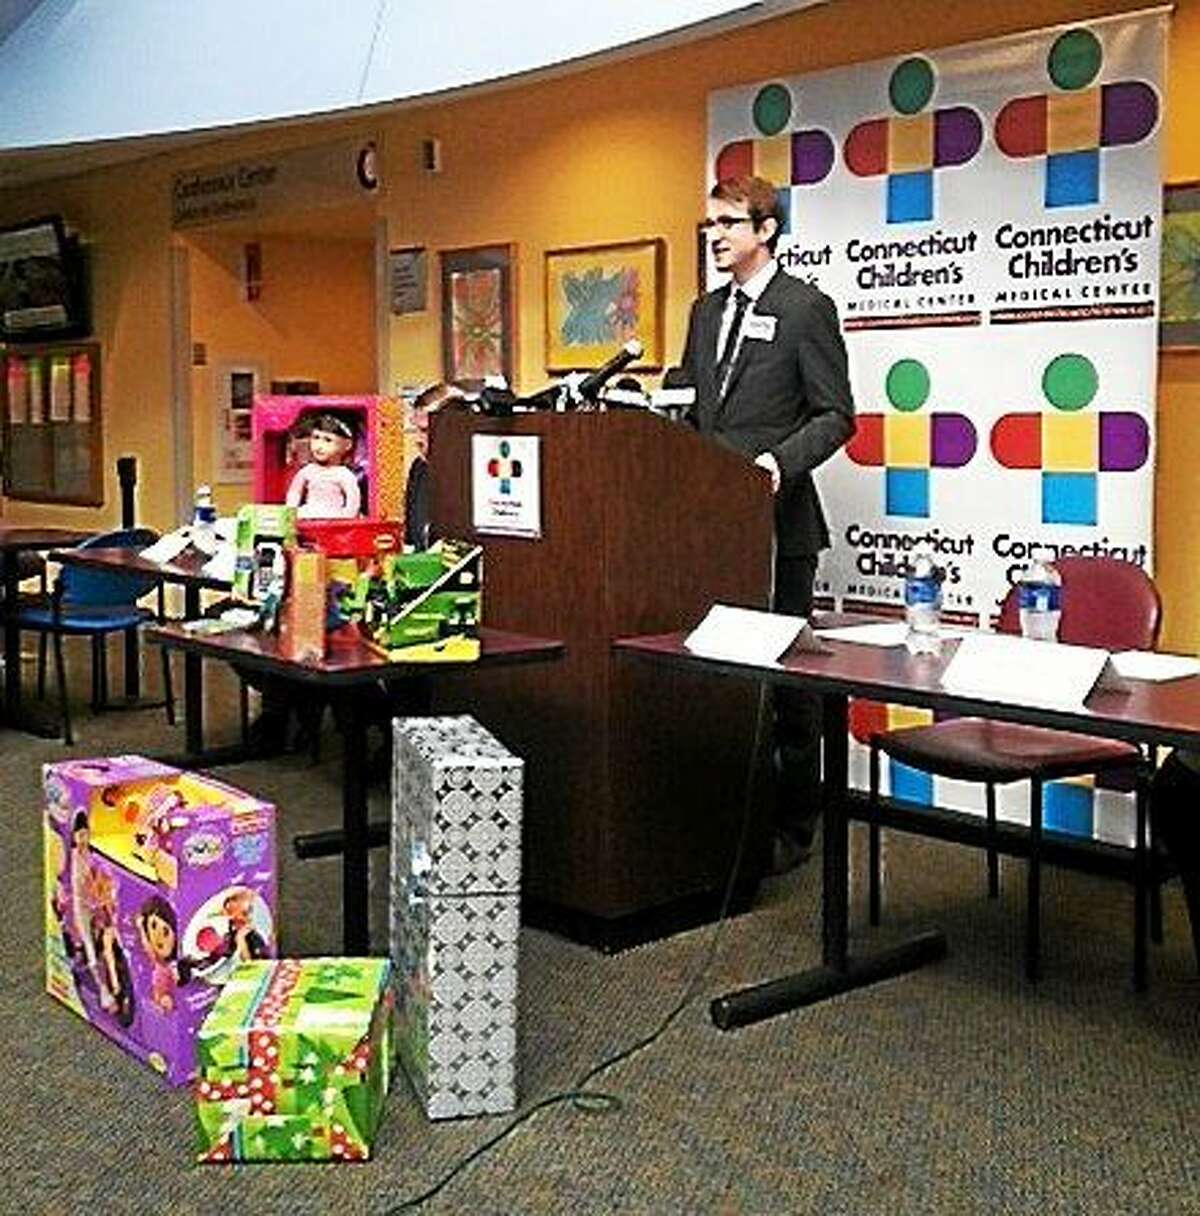 Sean Doyle, campaign organizer with ConnPIRG, discusses the annual Trouble in Toyland report Monday.